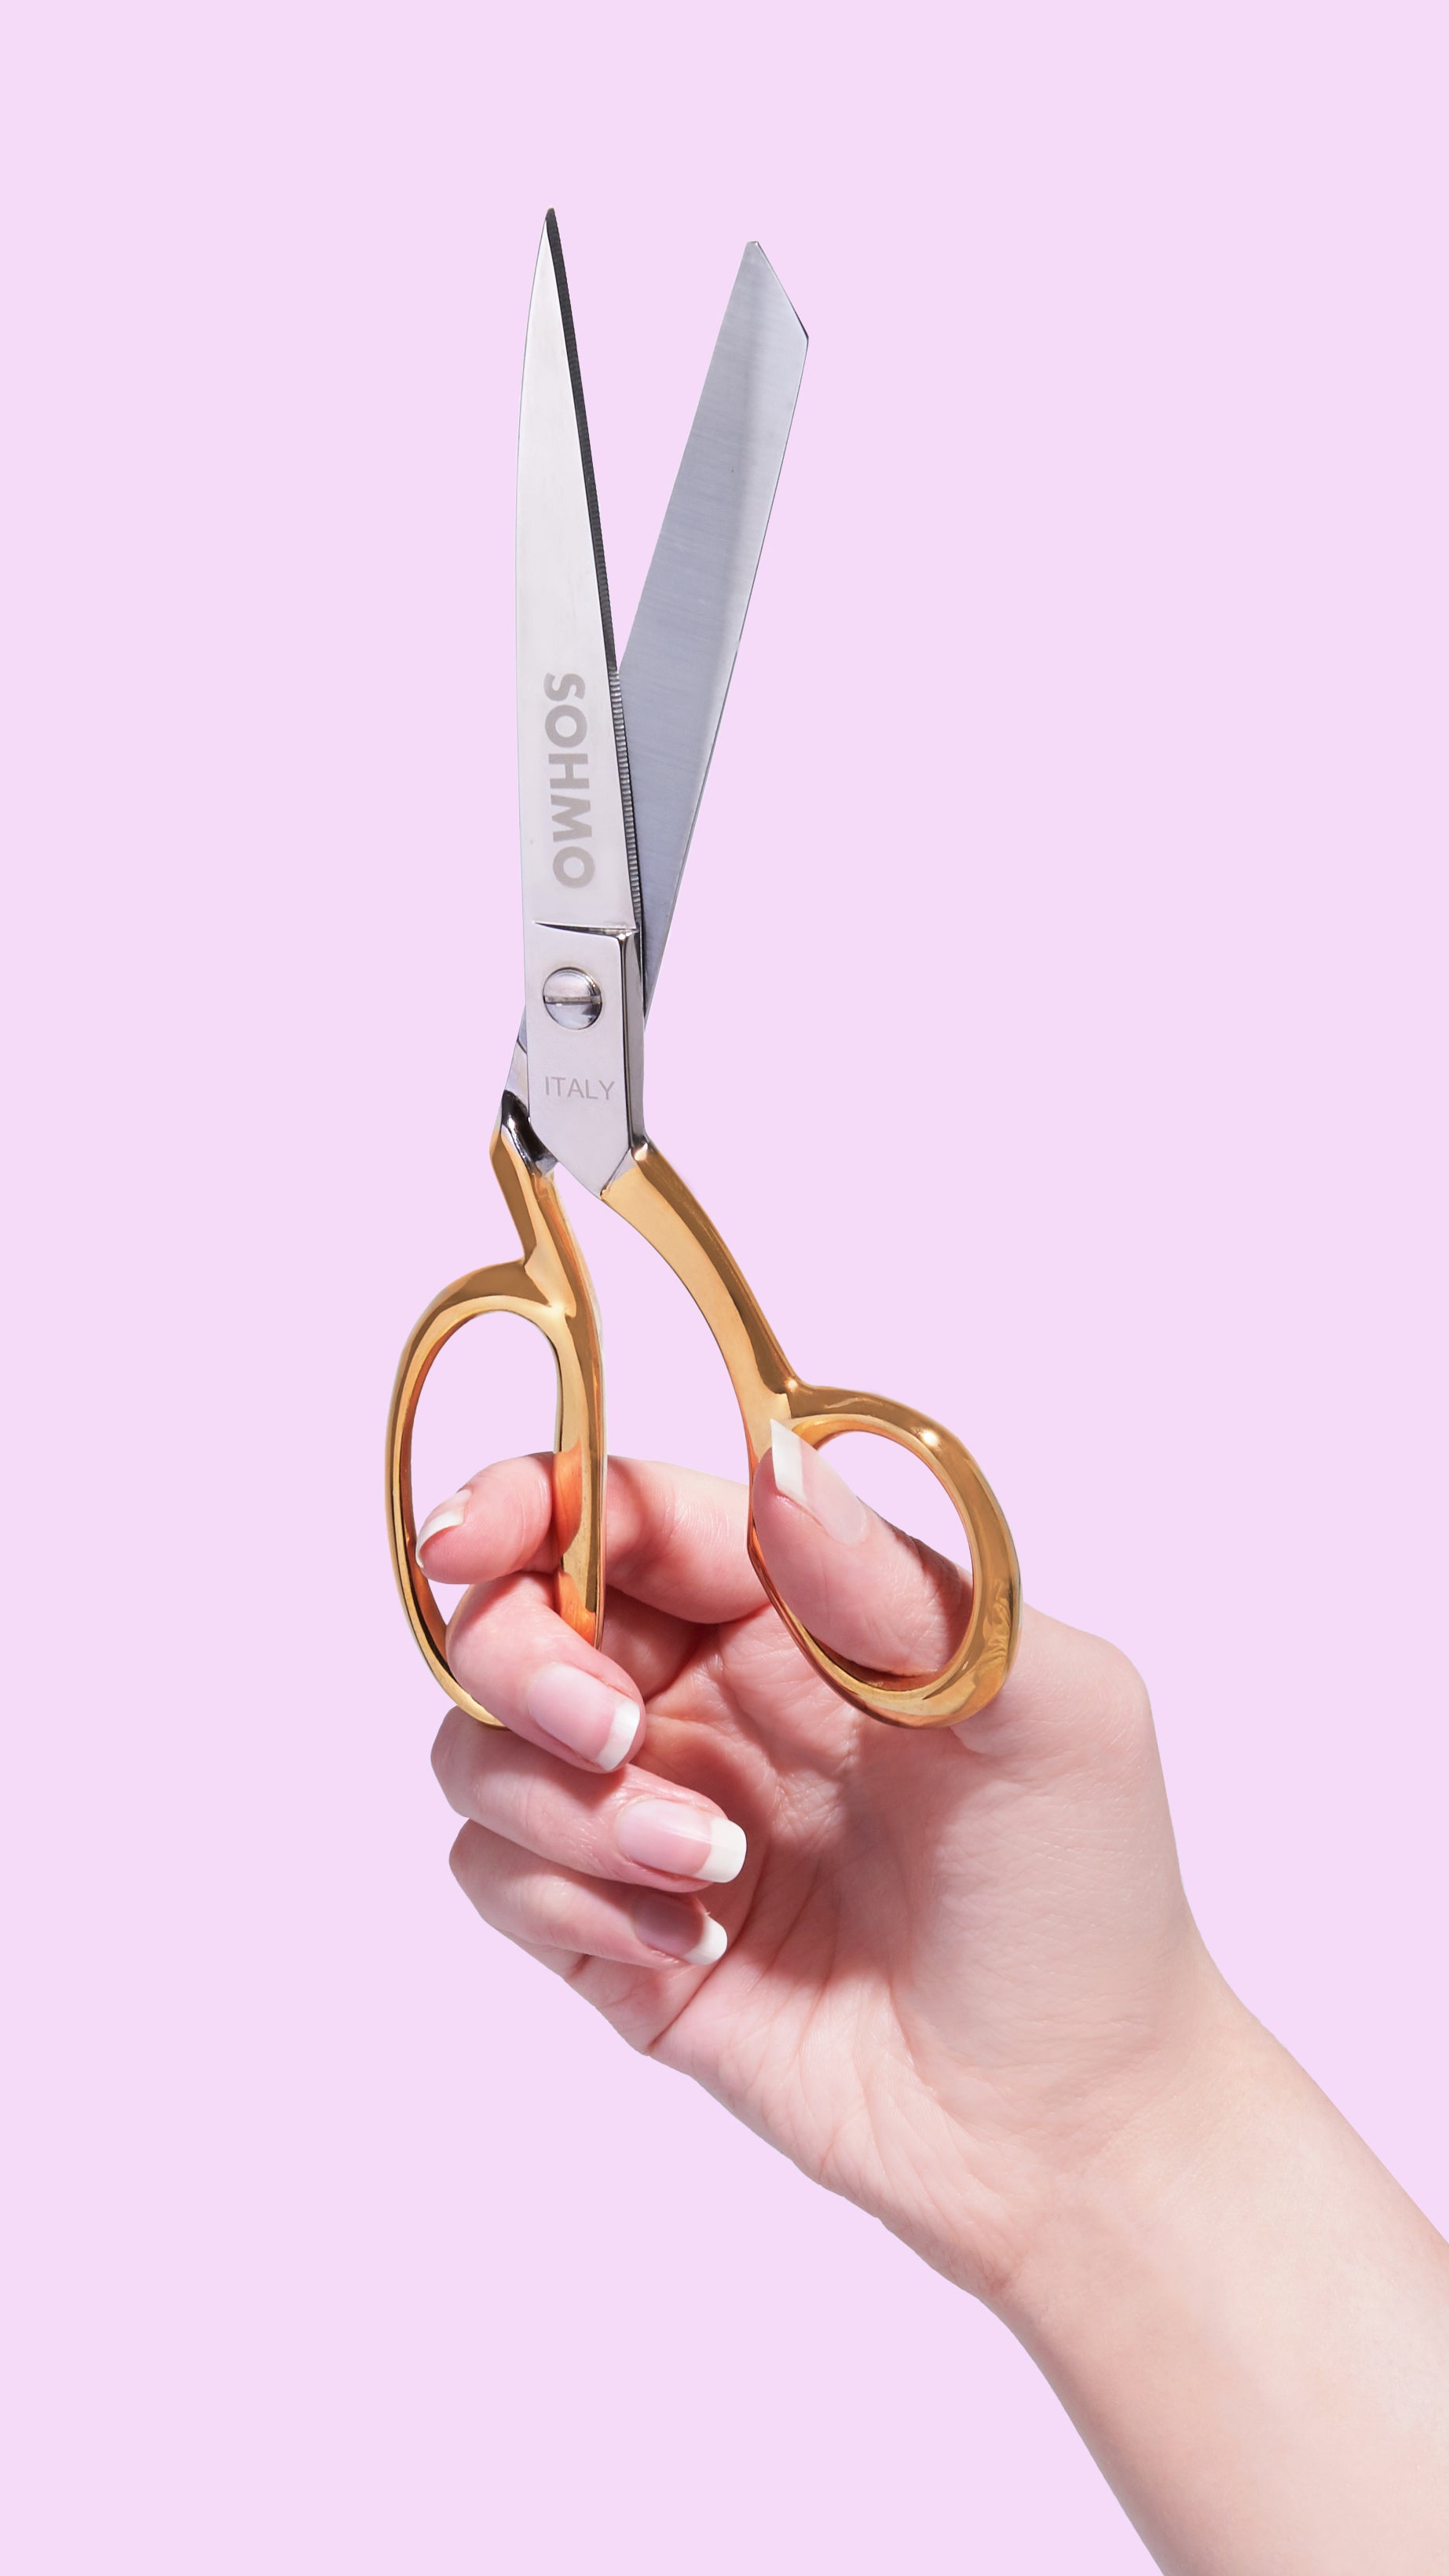 SOHMO sewing scissors with 24kt gold plated handles